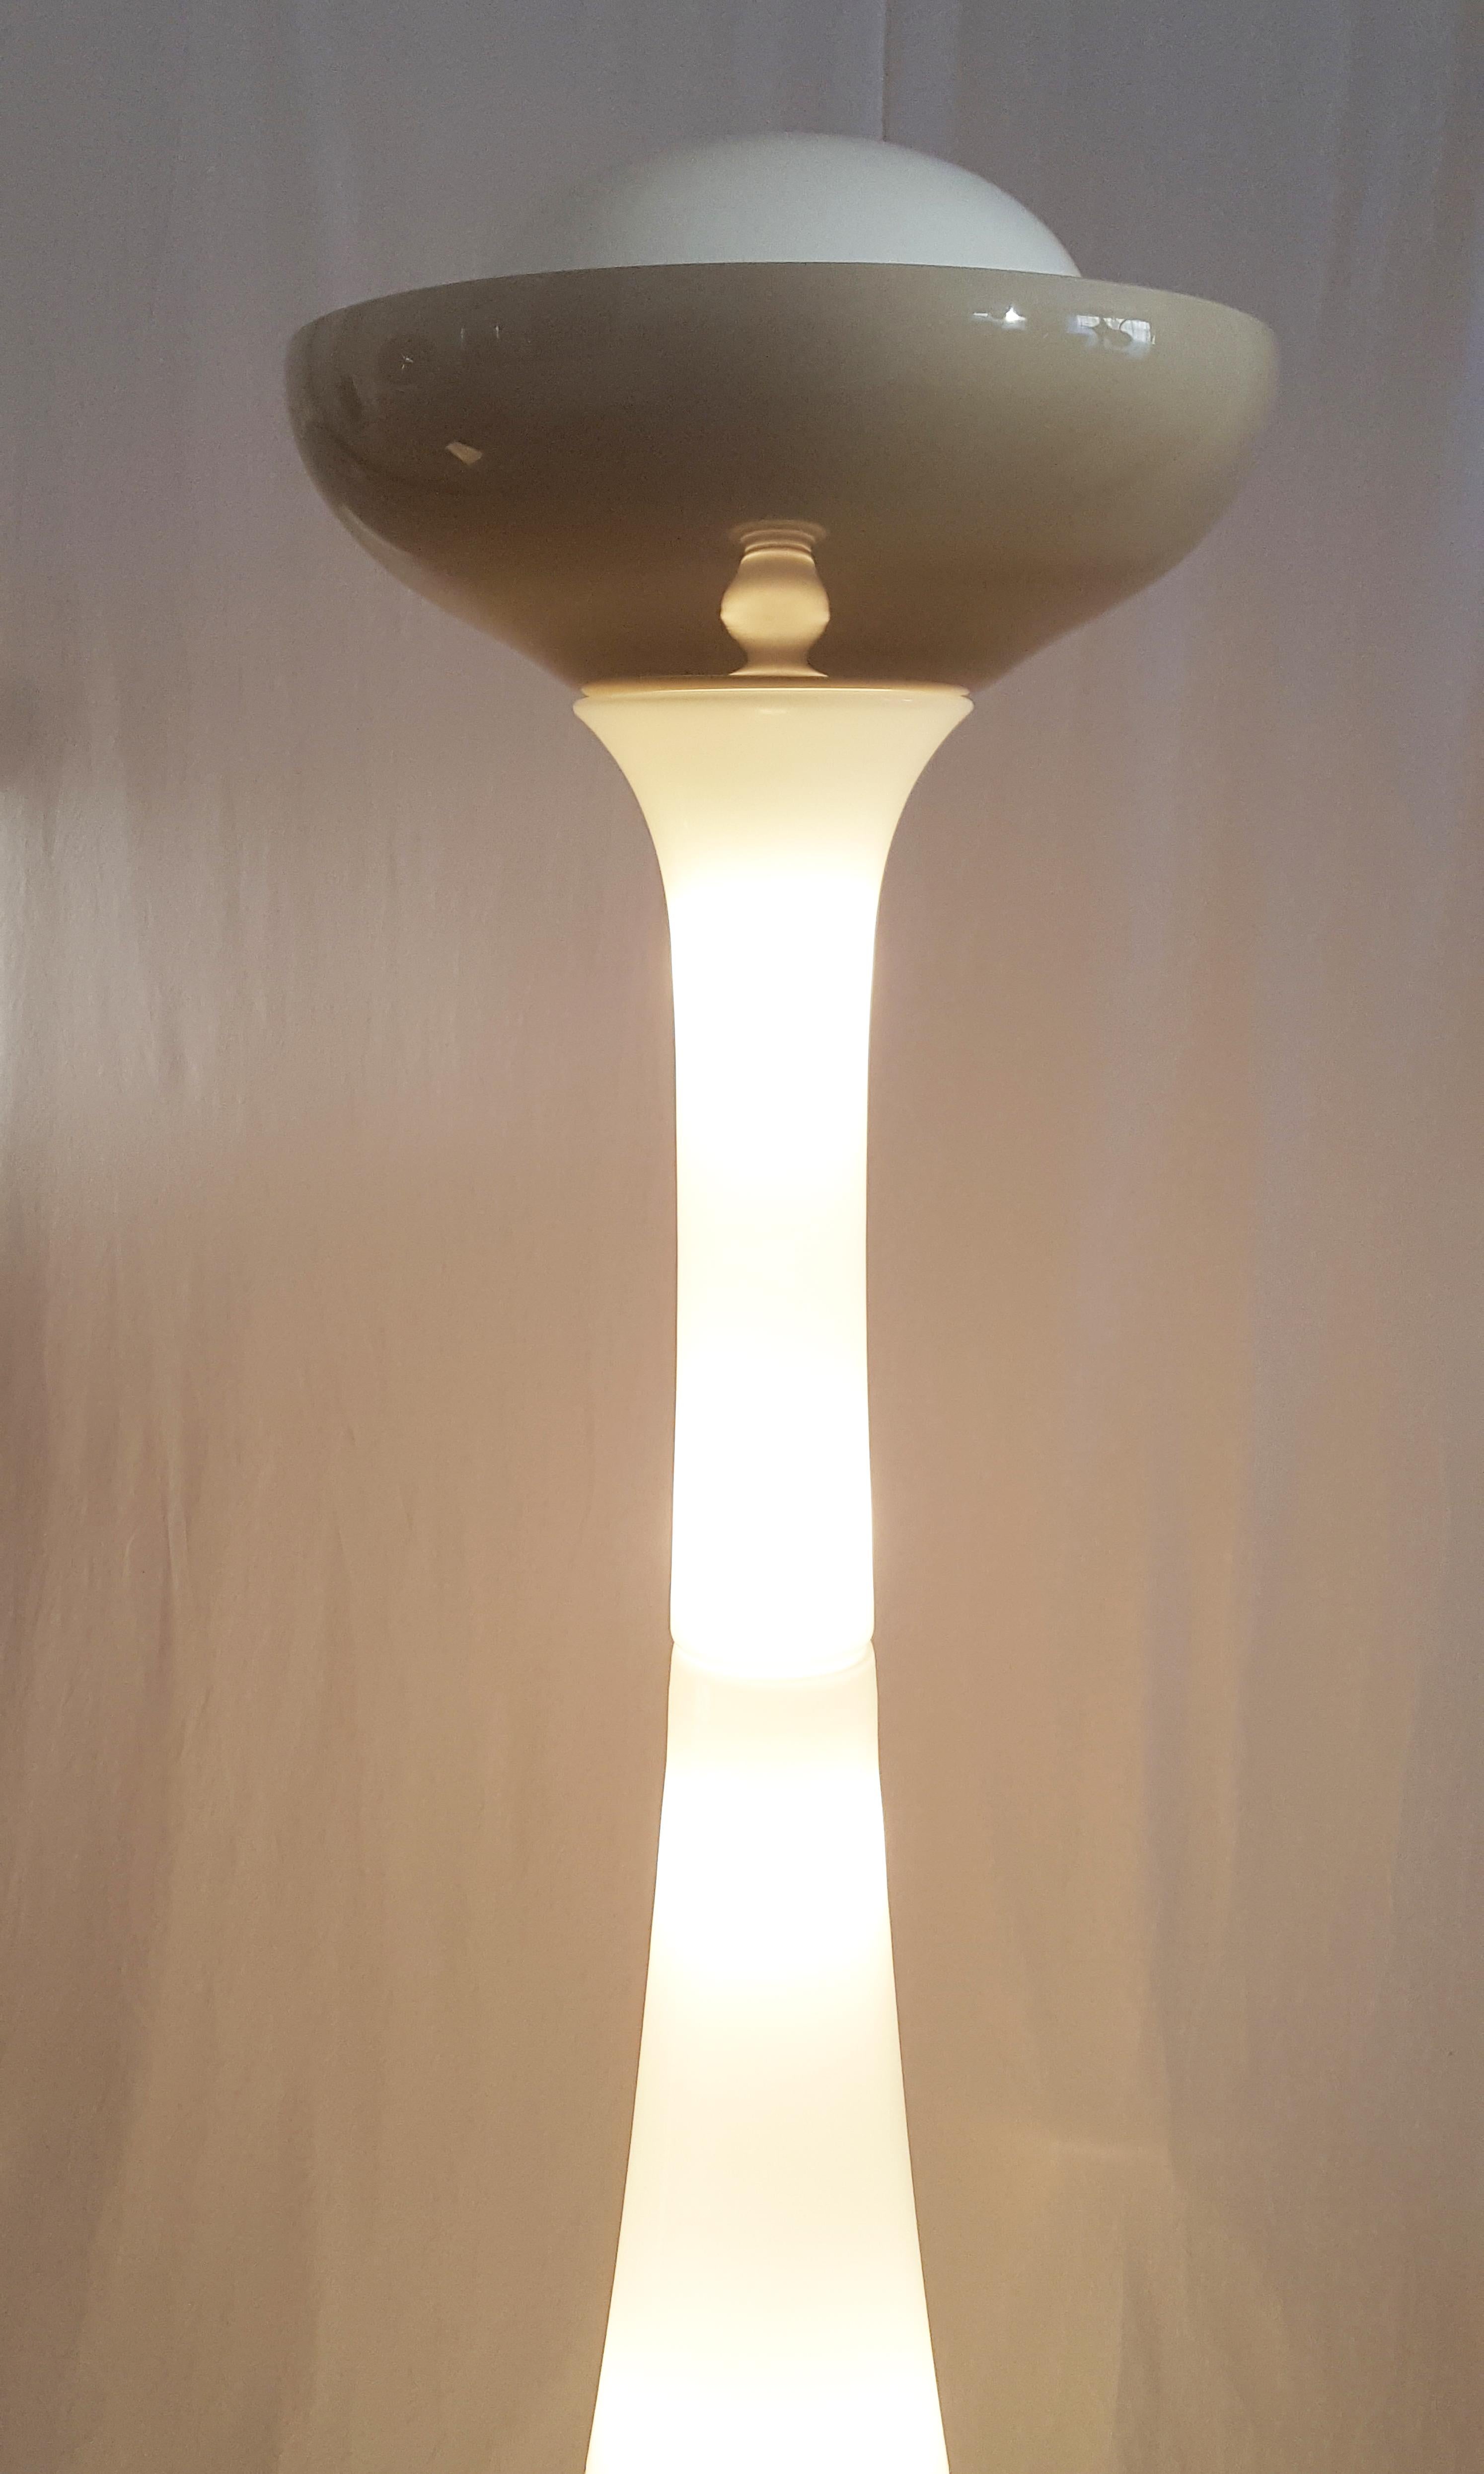 Olive Green and White Murano Glass Floor Lamp by Carlo Nason for Selenova, 1960s For Sale 6